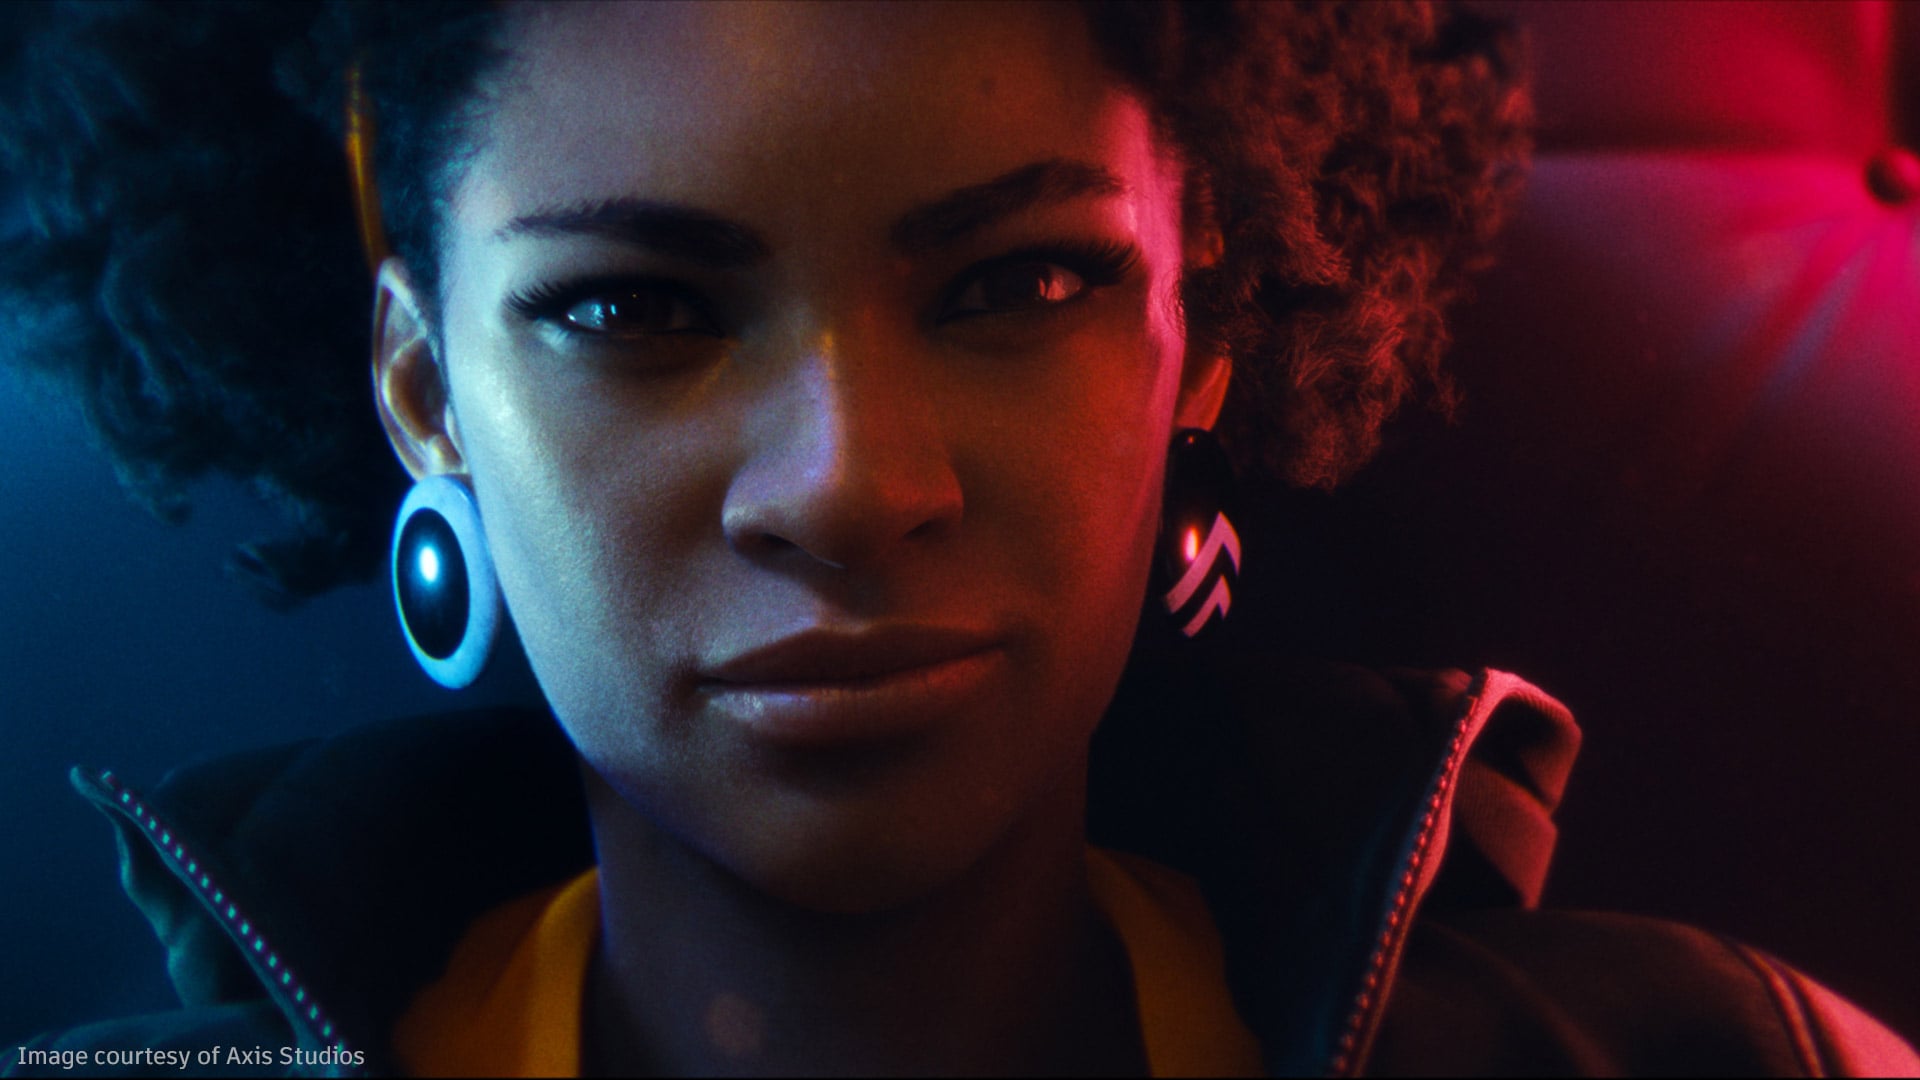 Portrait image of a young African American female character from DEATHLOOP game trailer